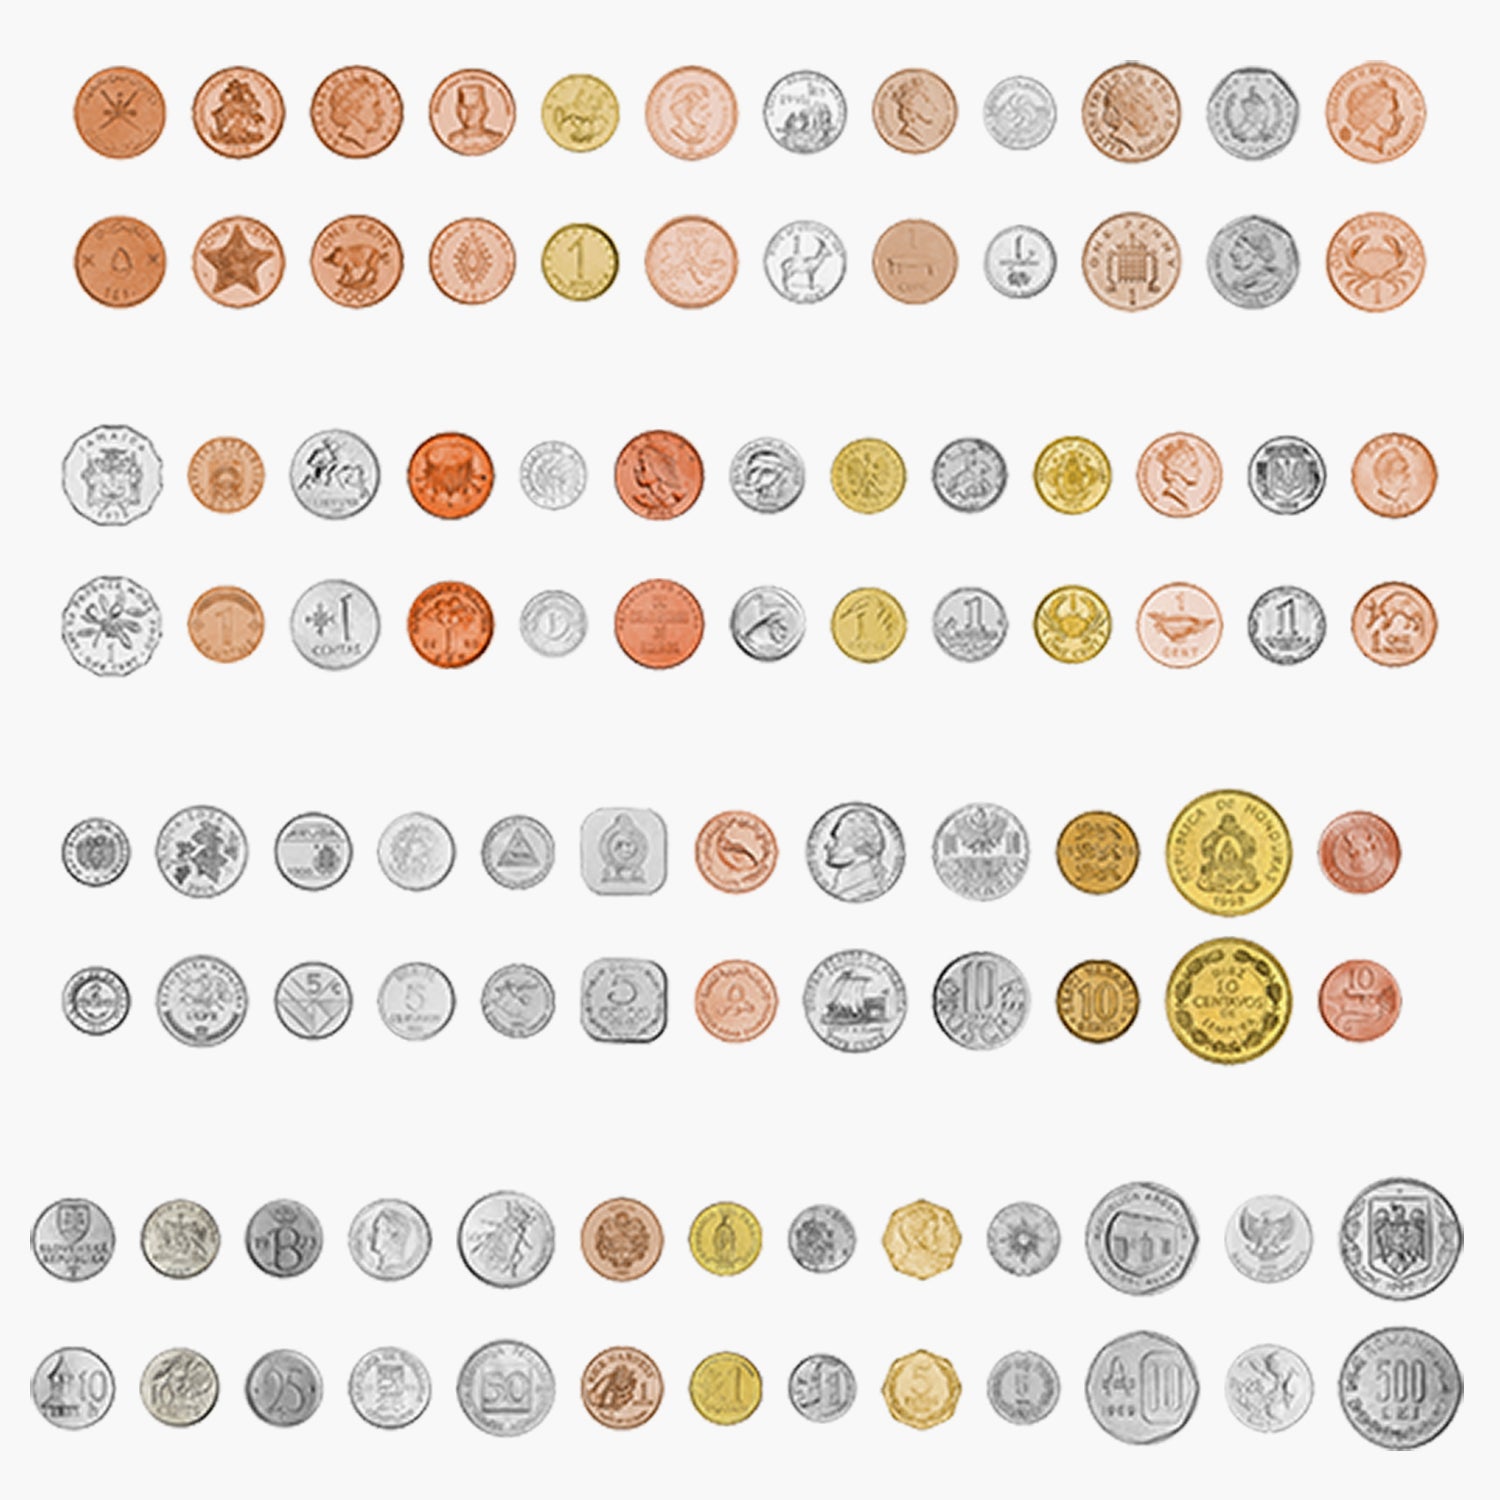 100 Coins from 100 Countries